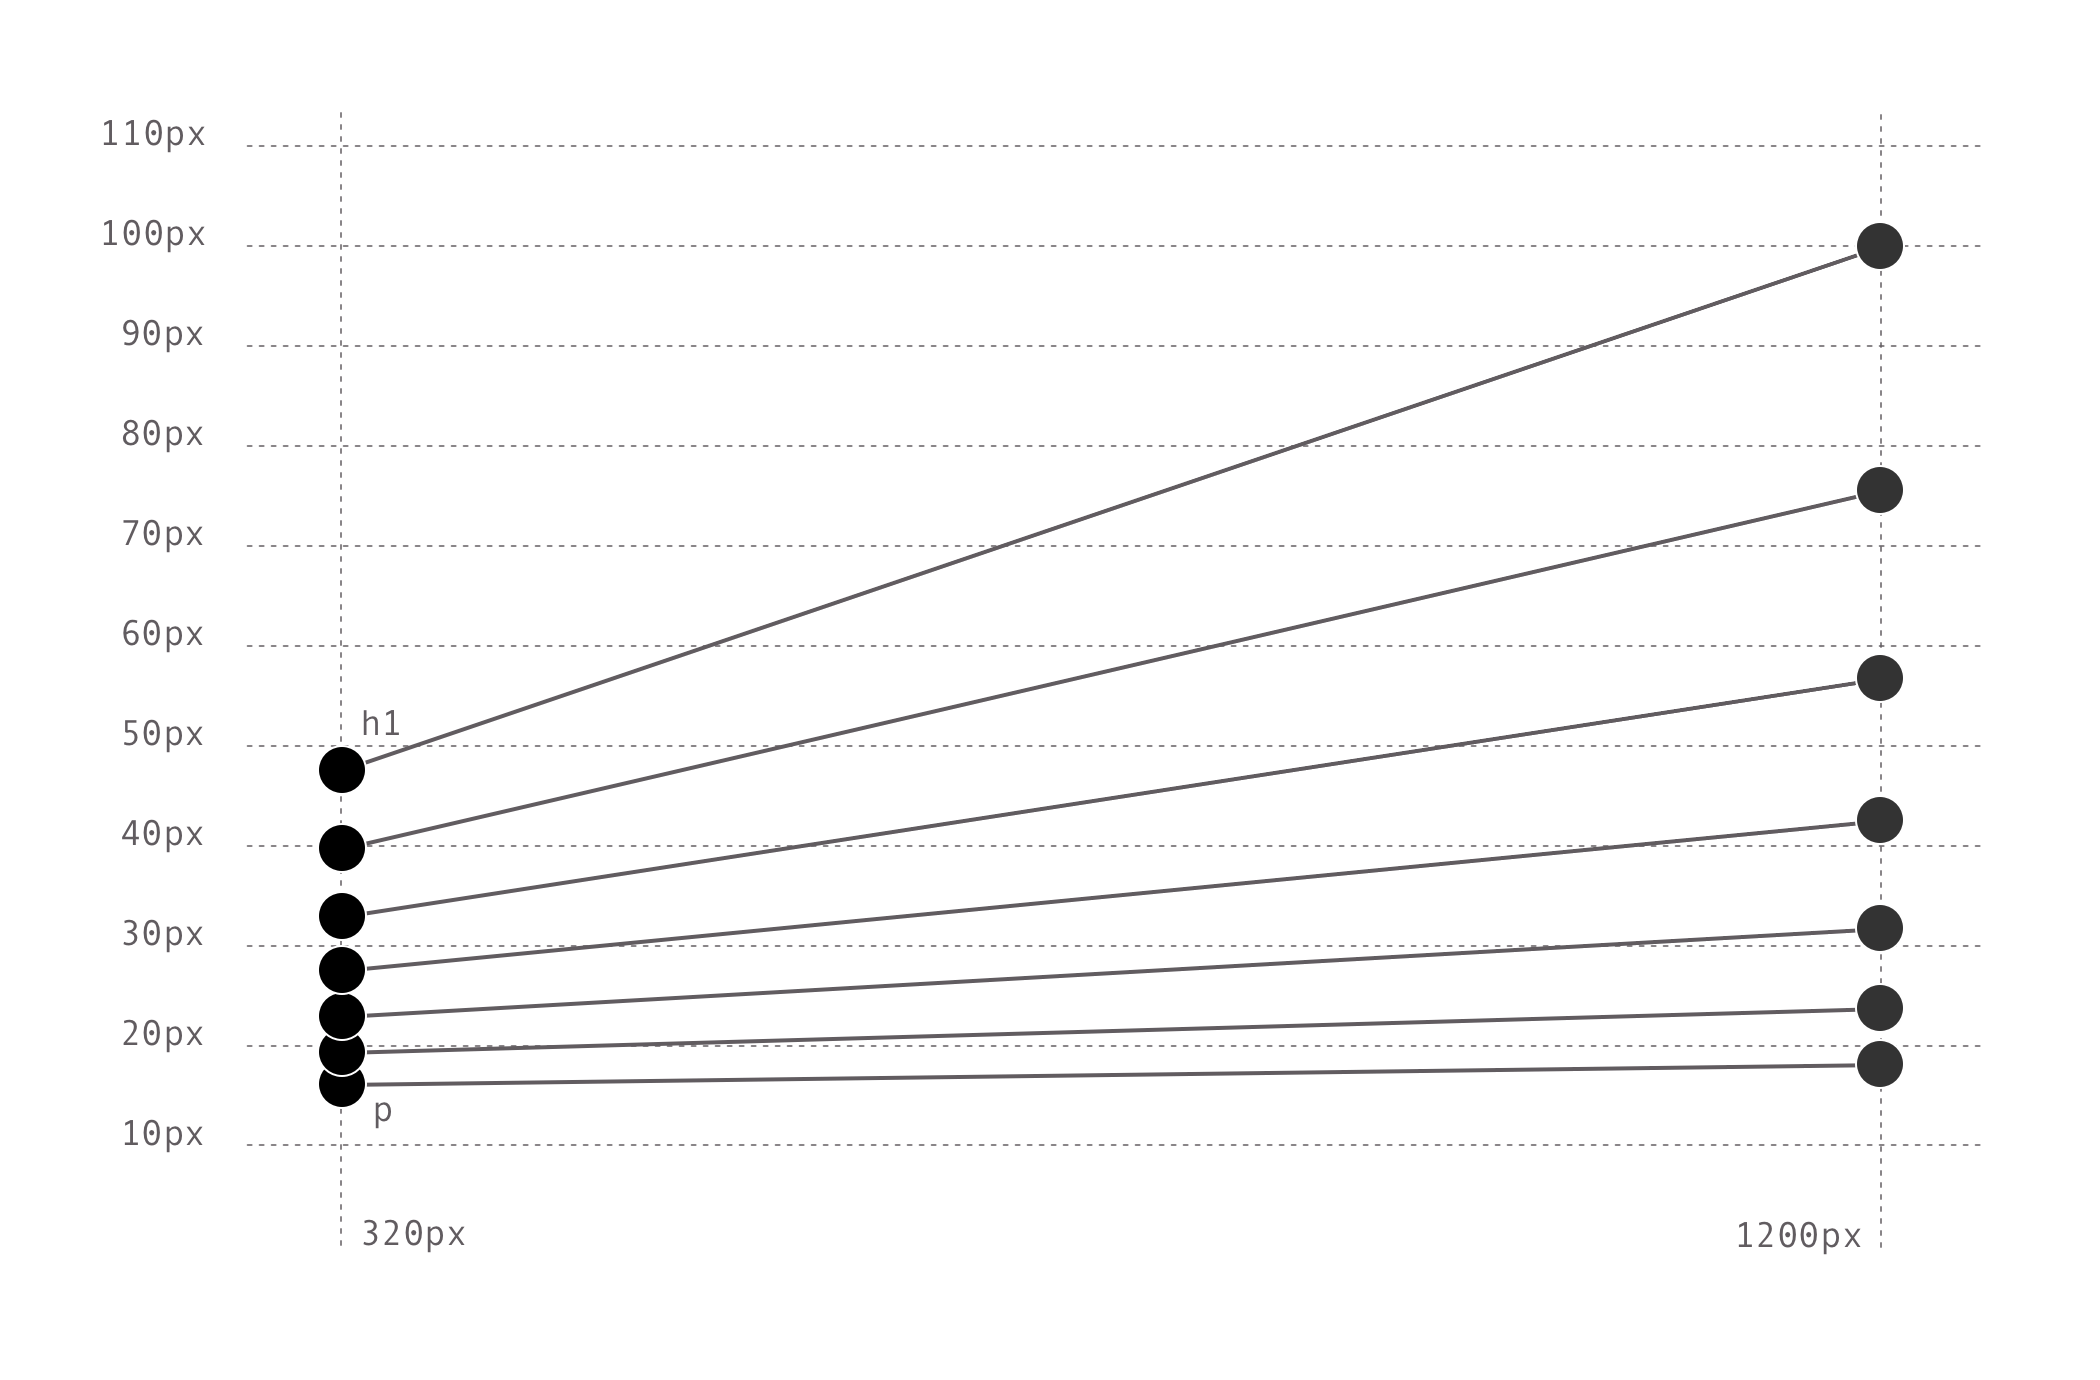 Chart showing the sizes and their interpolation from a 320px viewport to a 1200px viewport.